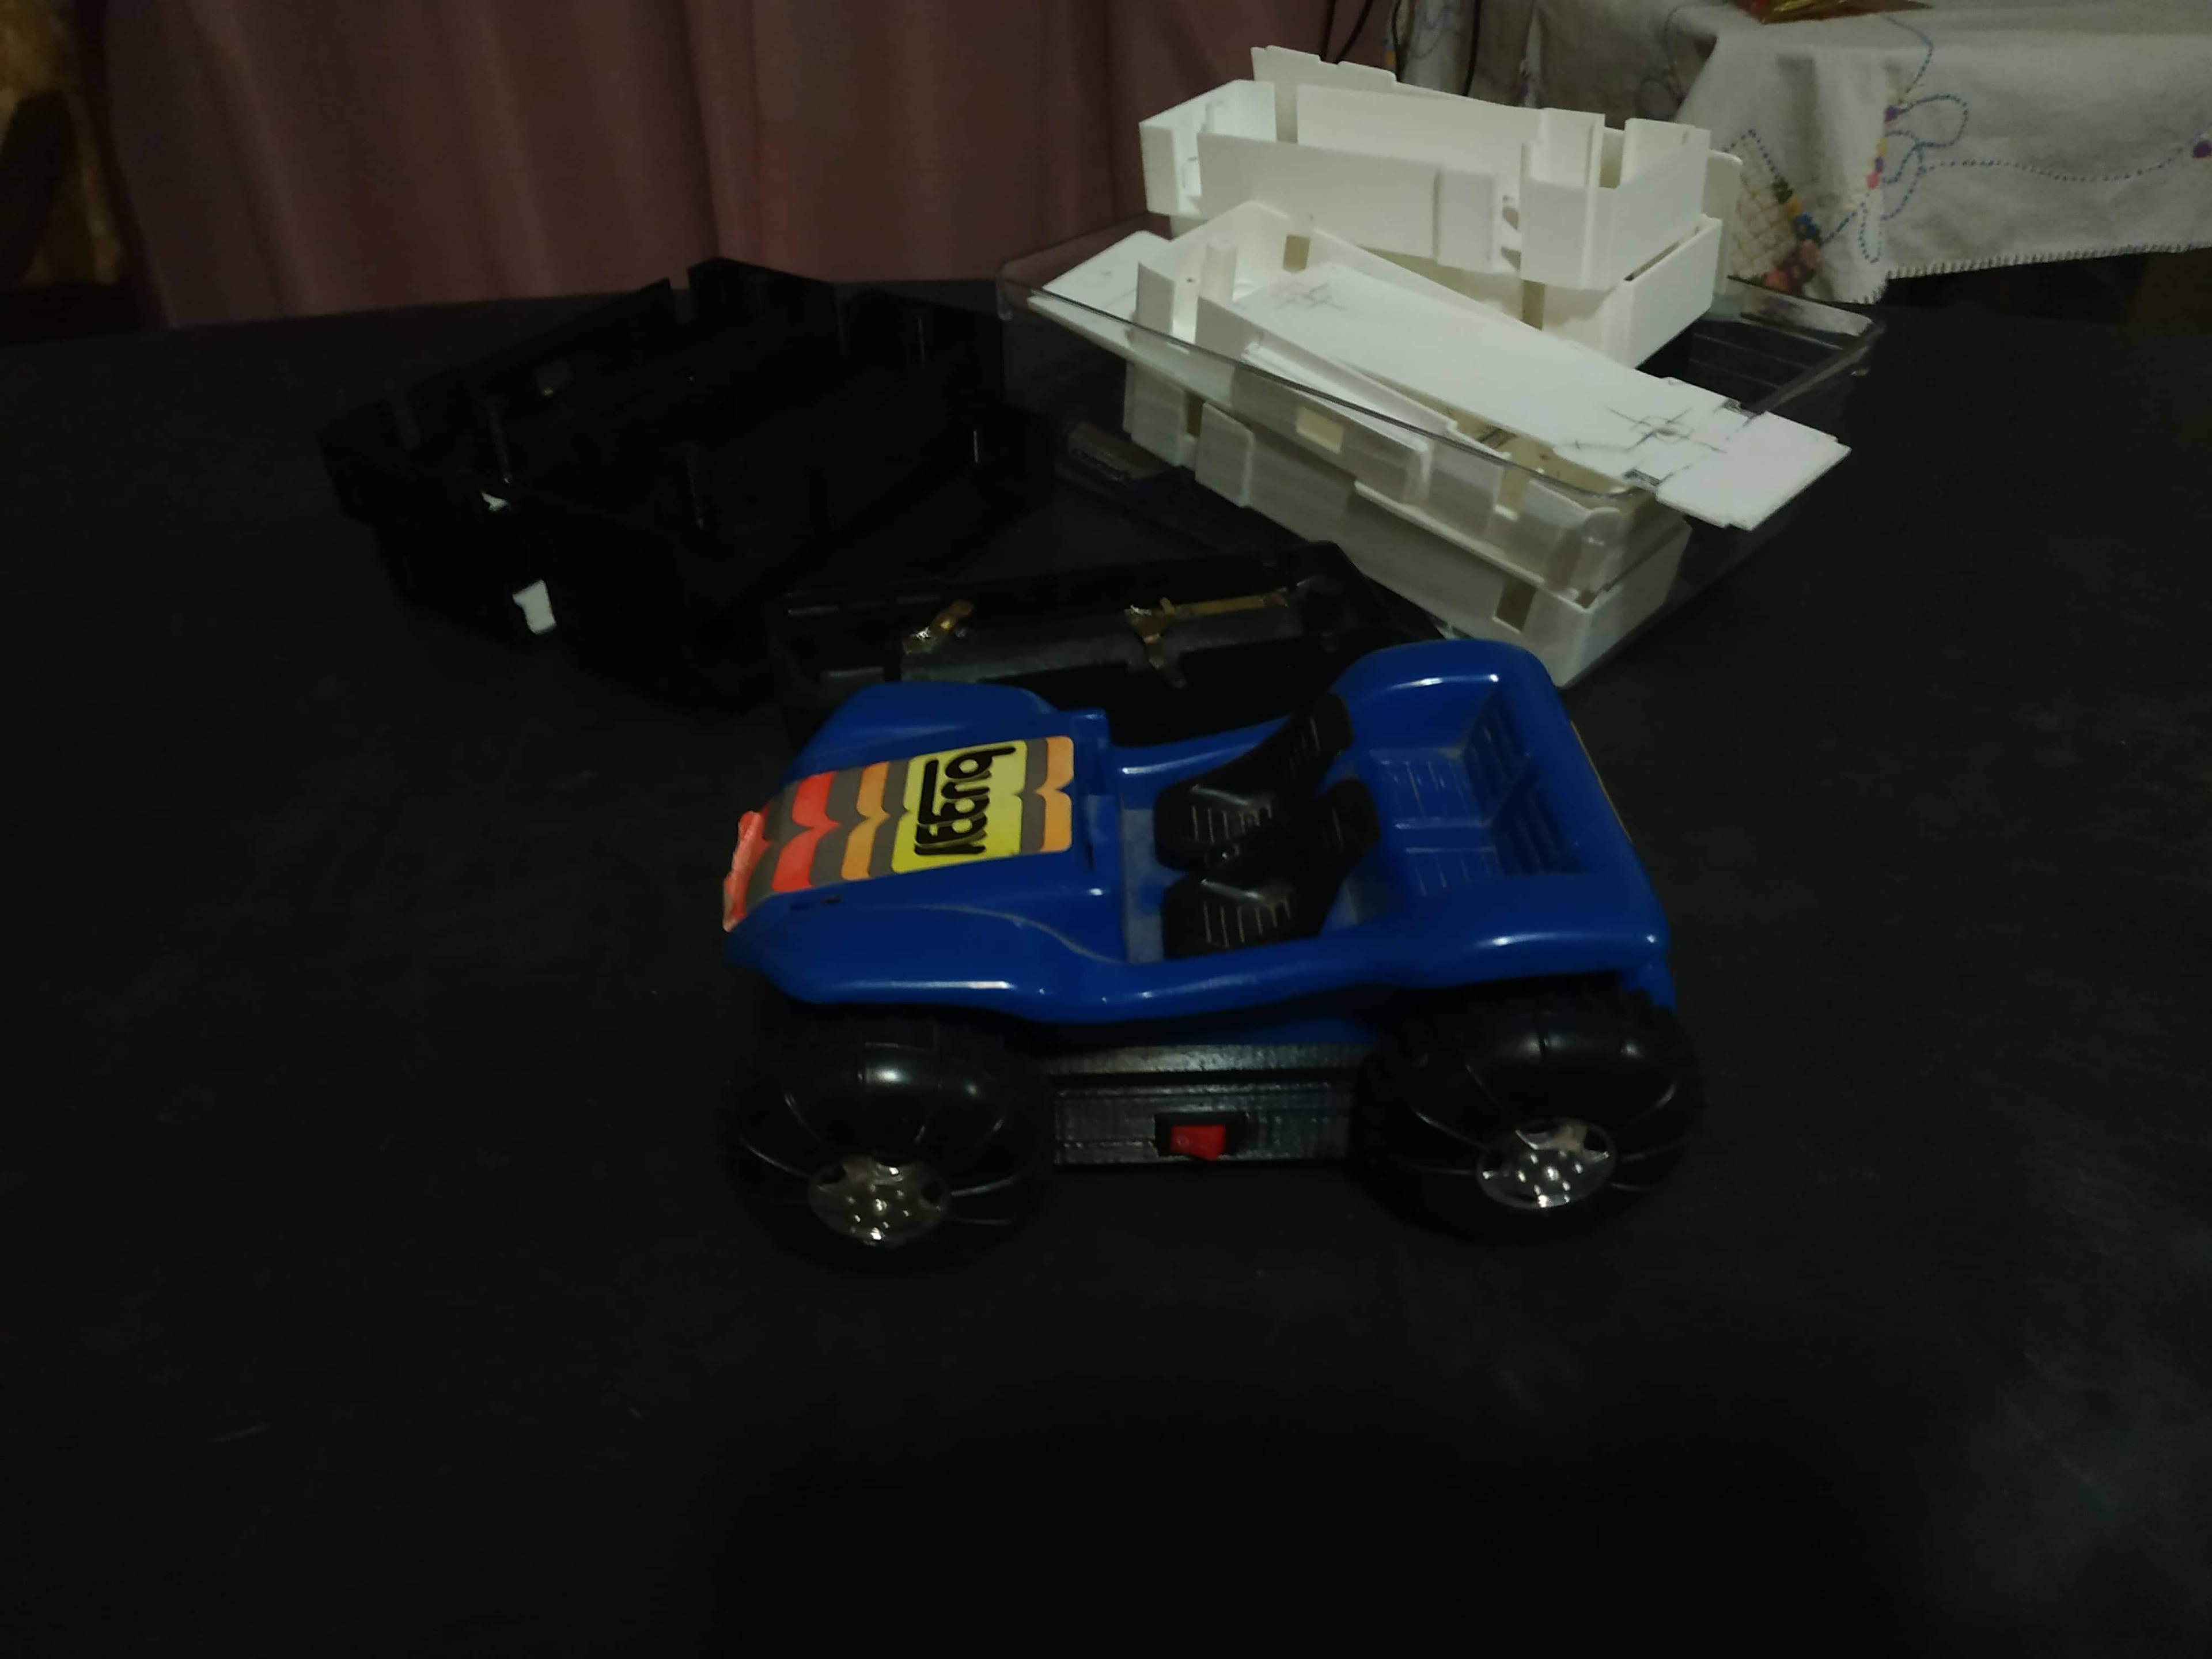 The completed buggy sits on a table in front of a pile of 3D-printed bases and its original base